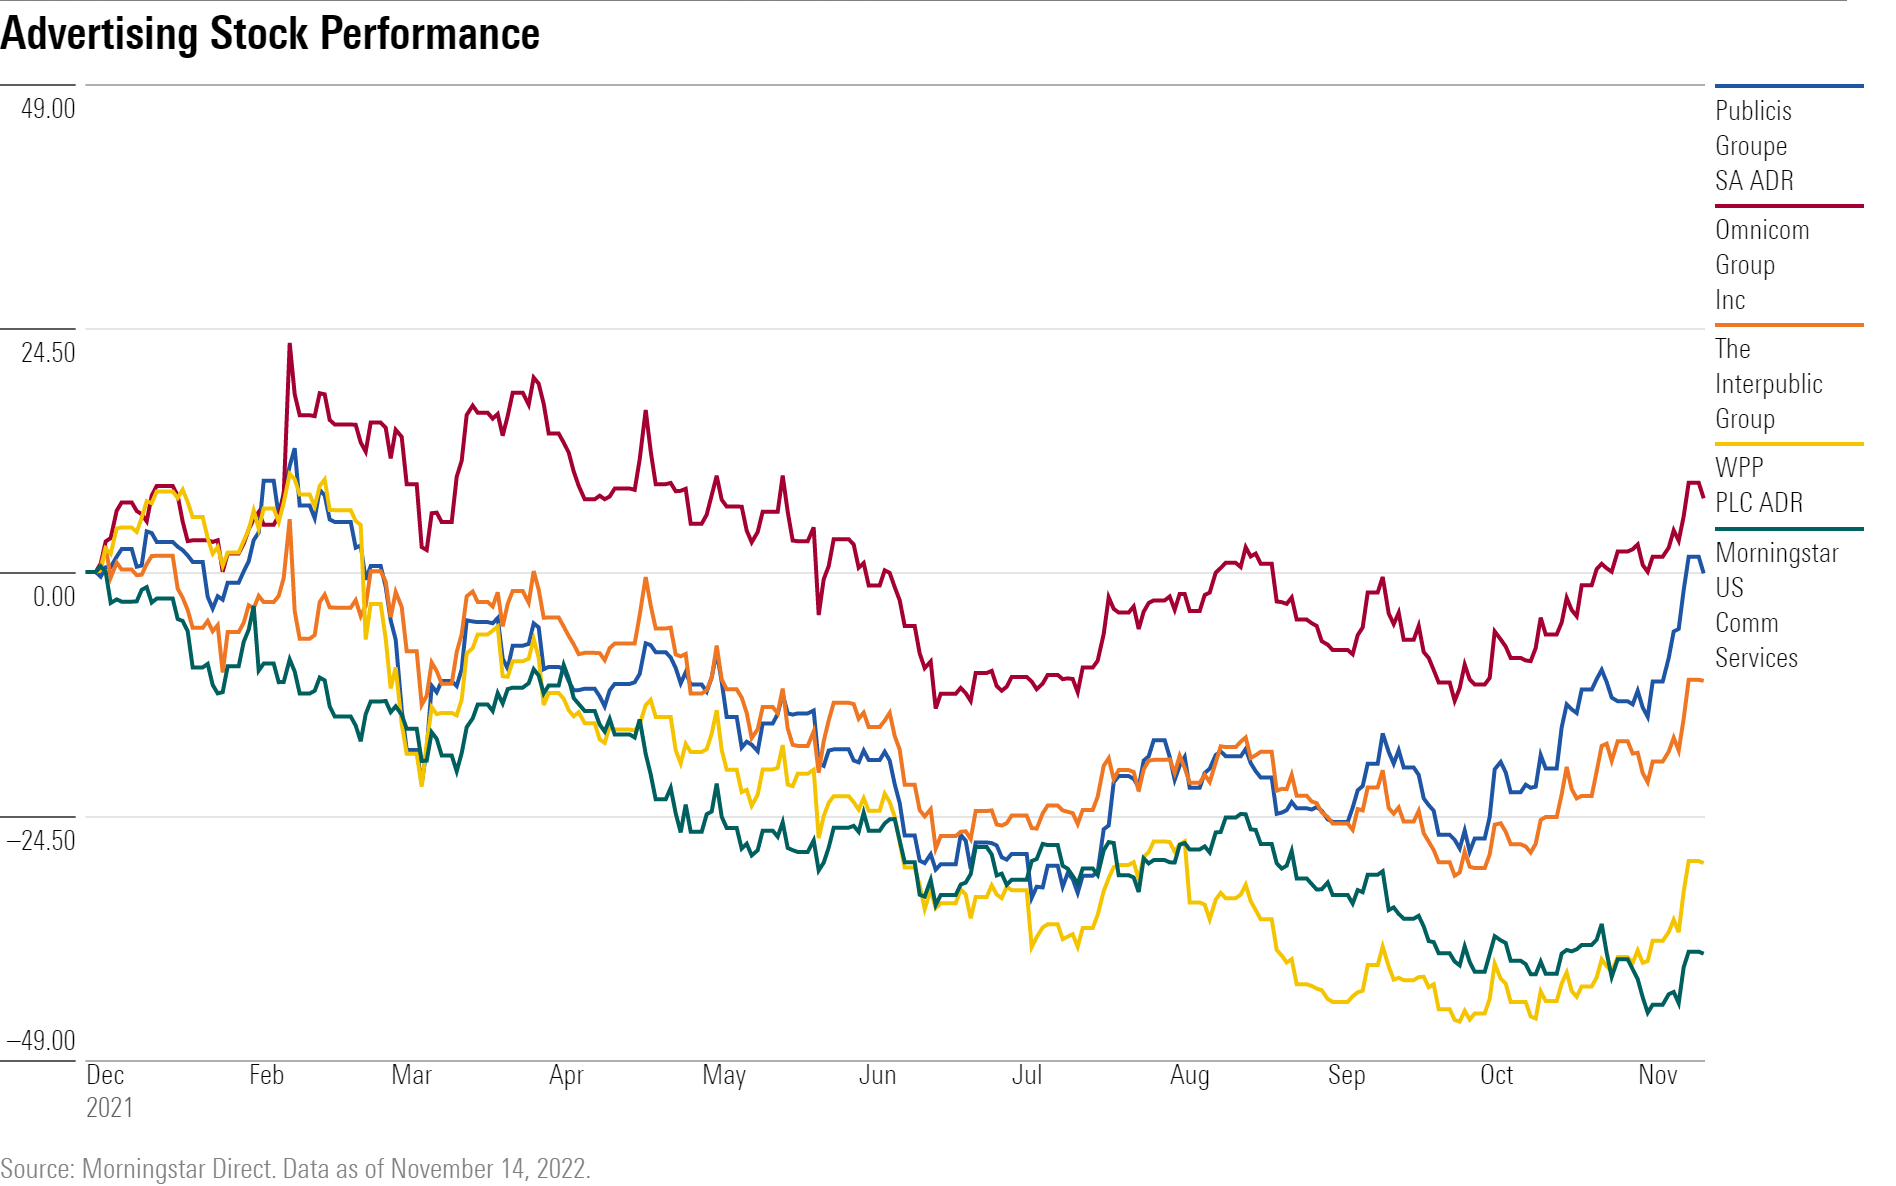 A line chart of the performance of advertising company stocks.